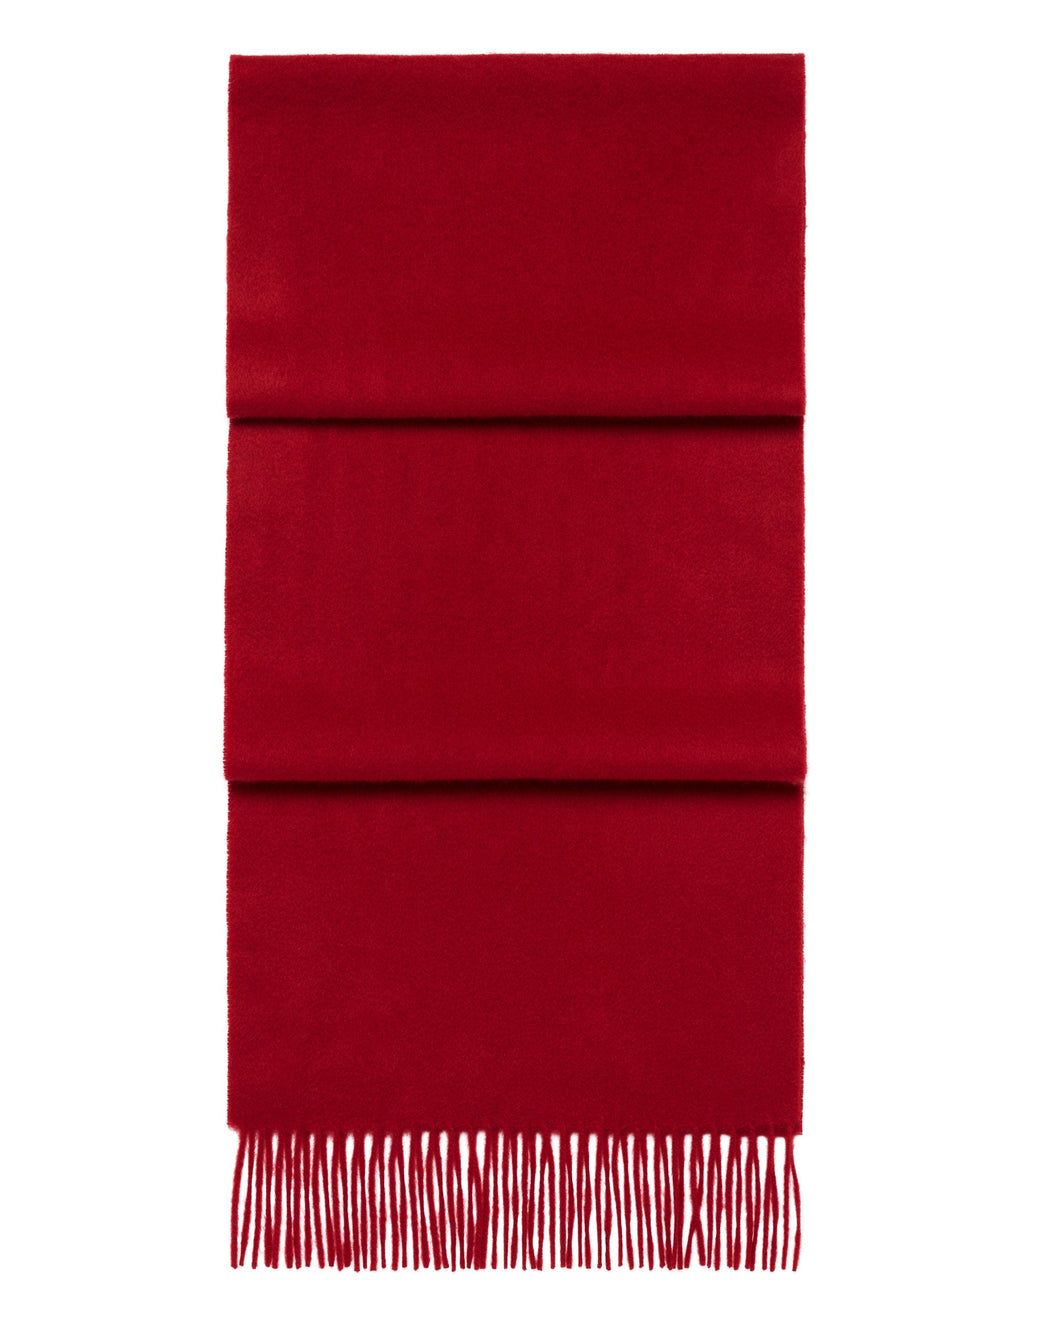 N.Peal Unisex Woven Cashmere Scarf Ruby Red